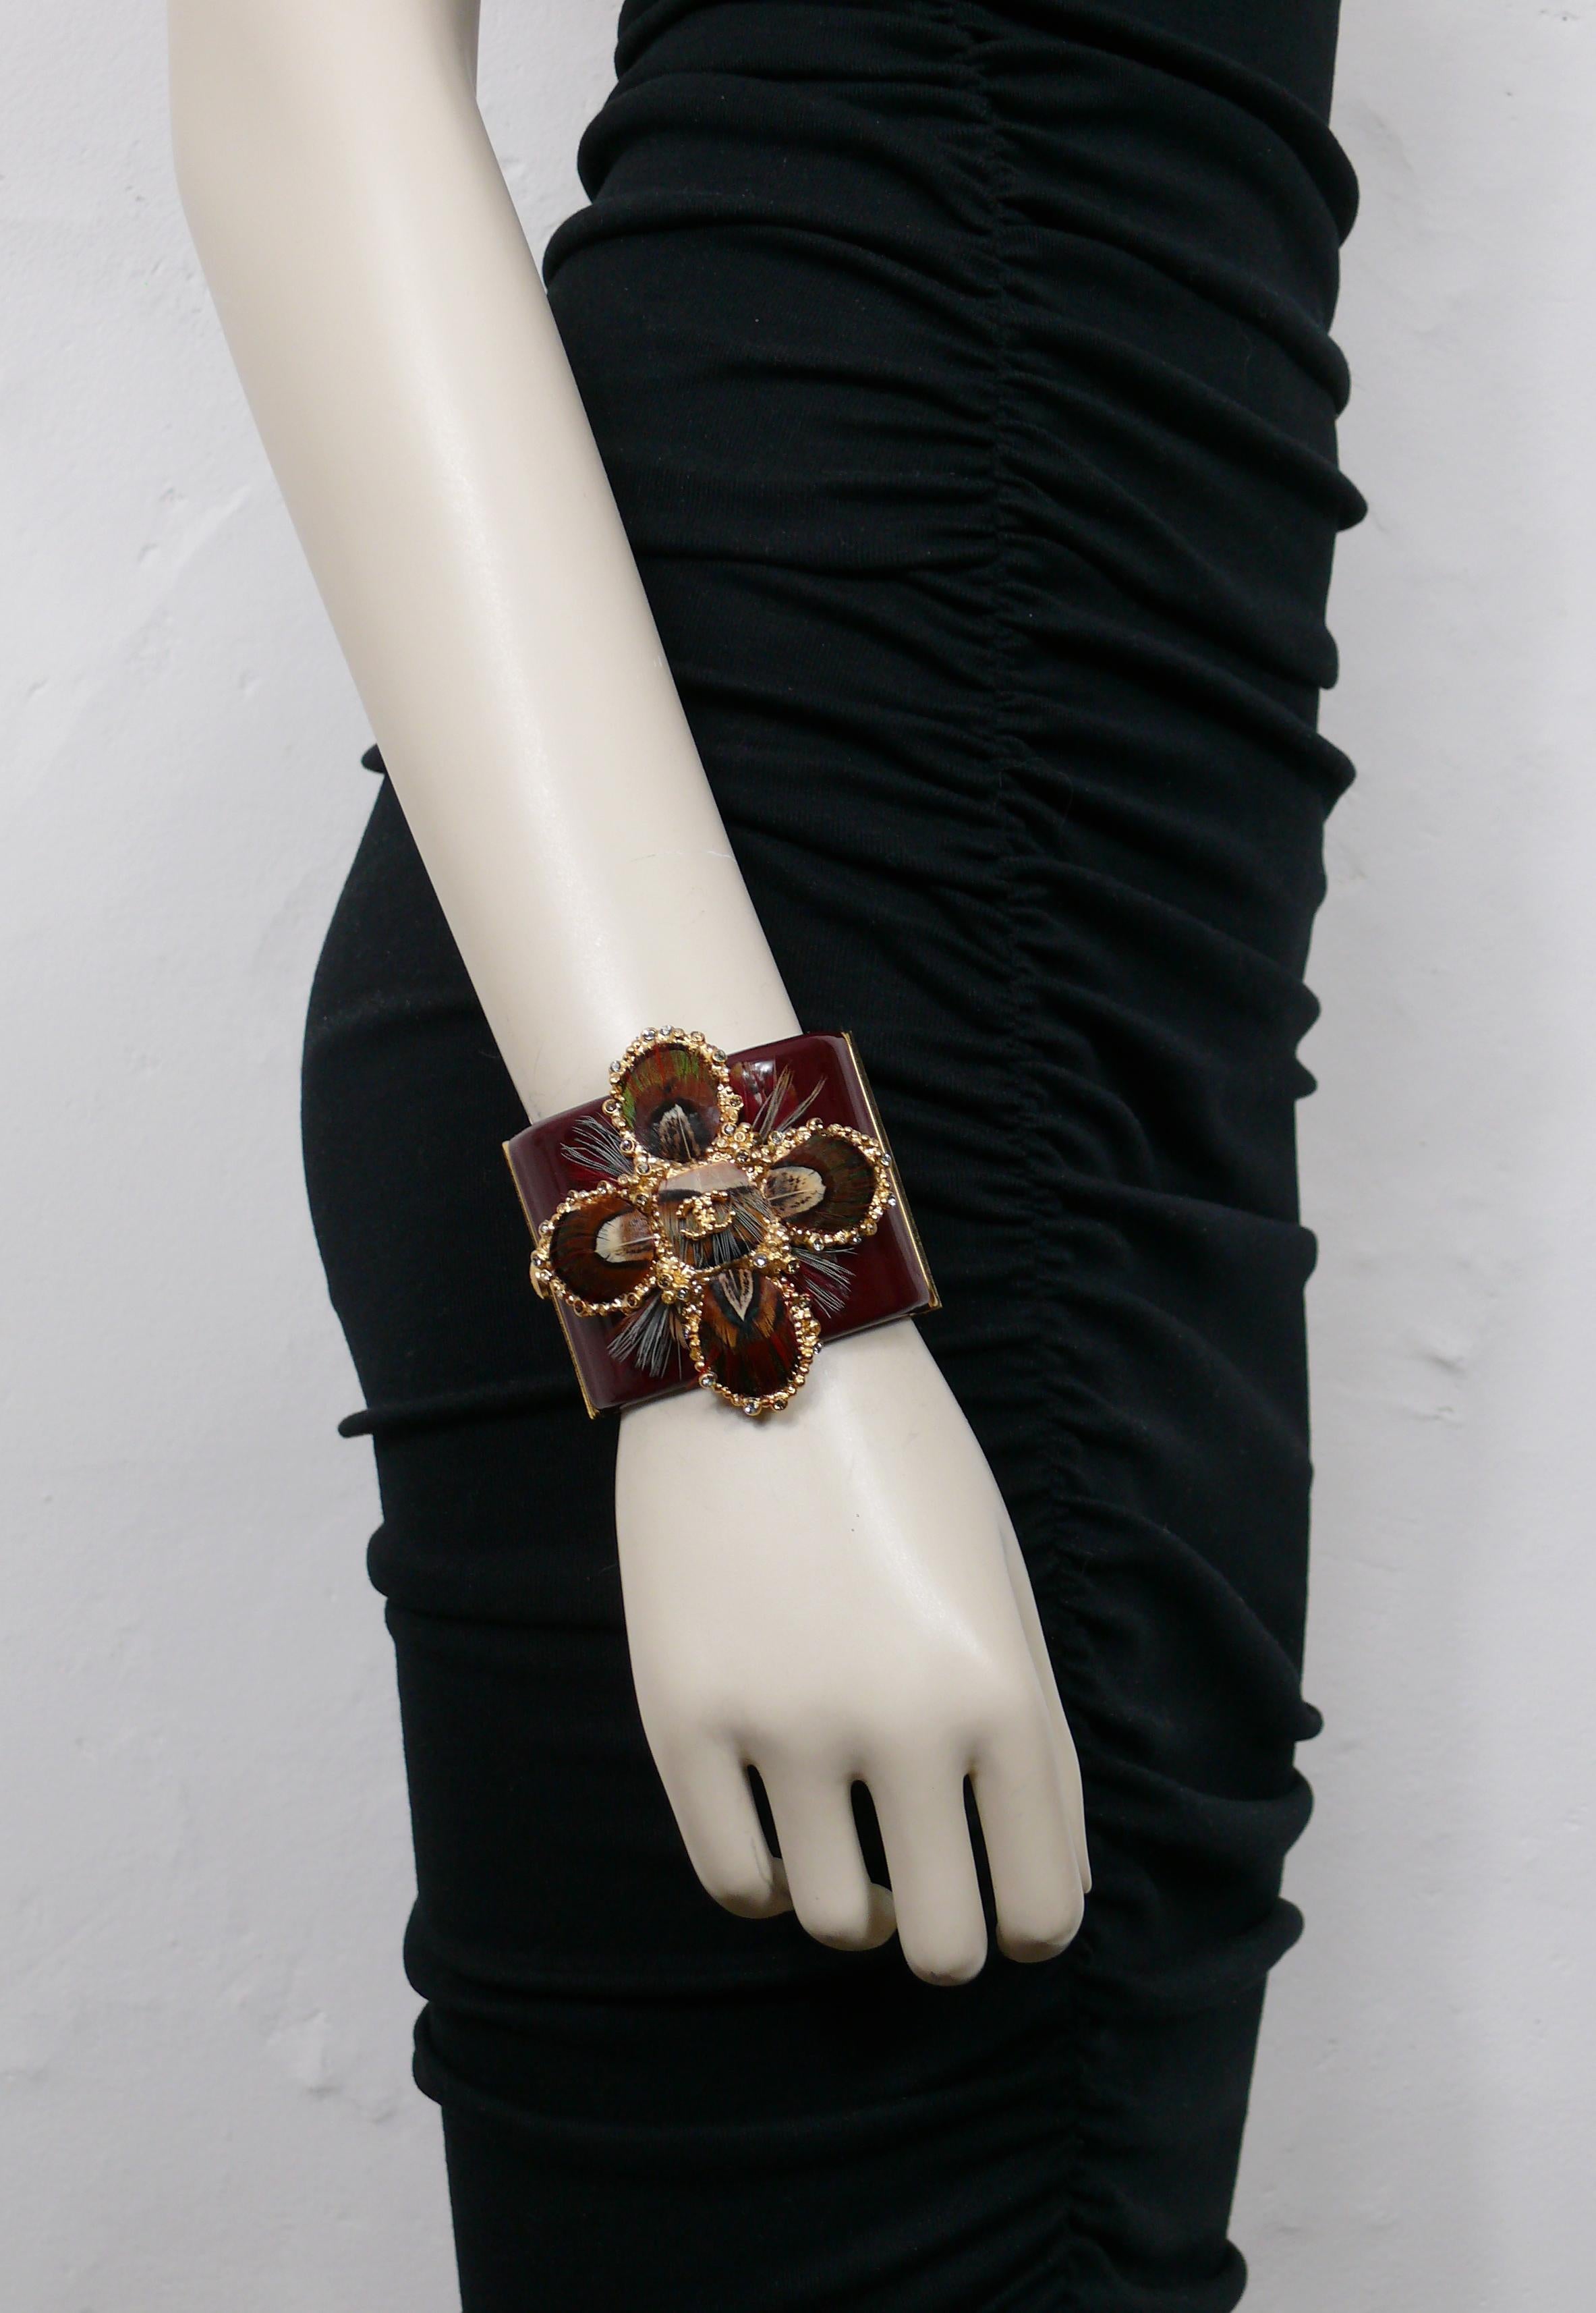 CHANEL by KARL LAGERFELD burgundy resin cuff bracelet featuring a gorgeous textured gold toned cross embellished with multicolored crystals, feathers and a CC logo at the center.

From the Pre-Fall 2013 Metiers D'Art Paris-Edinburgh